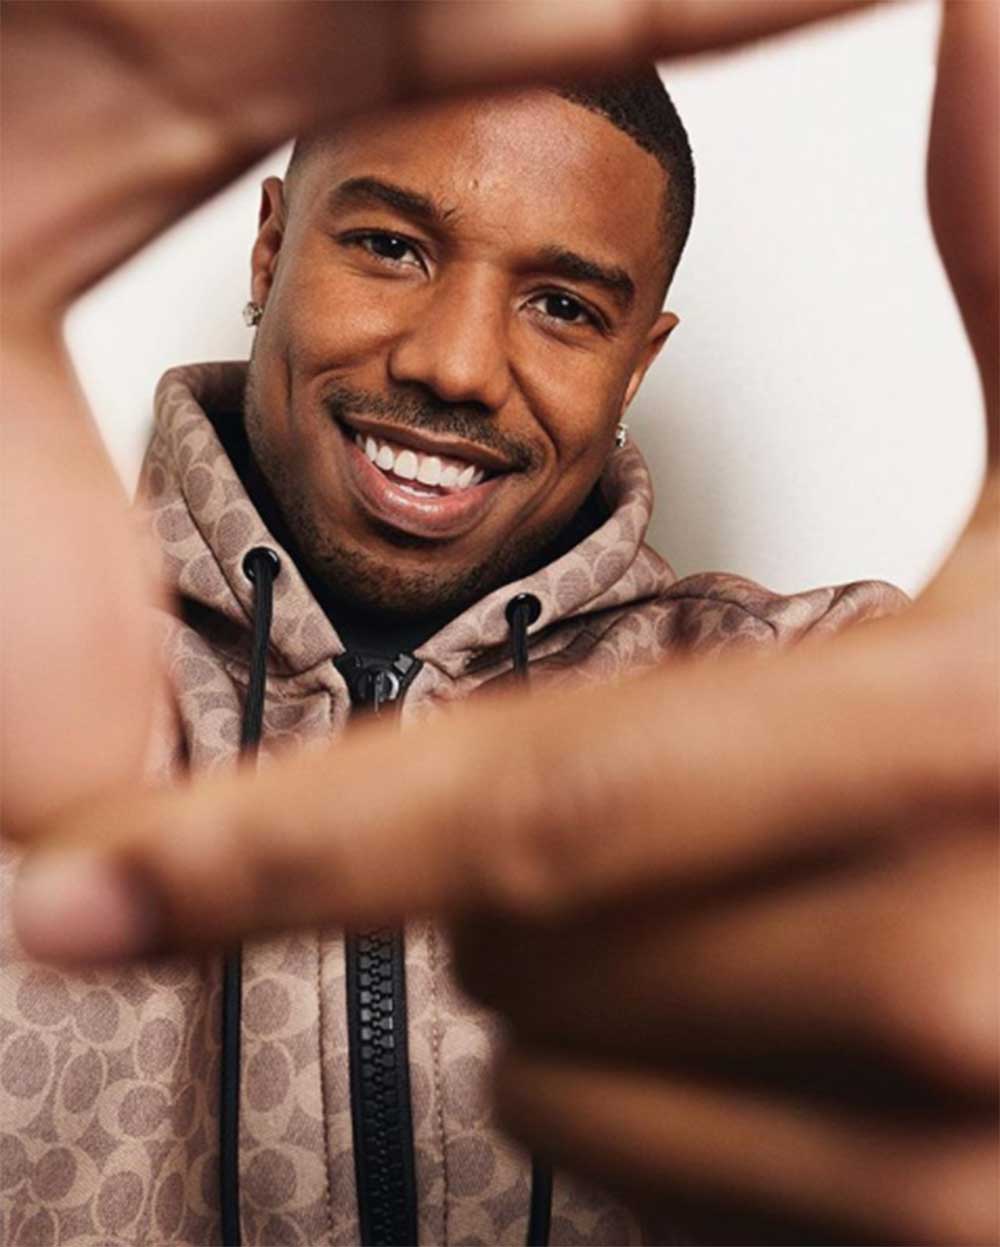 COACHの広告塔になったマイケル（画像は『Michael B. Jordan　2018年9月20日付Instagram「With any creative endeavor, it’s all about finding the right fit.My next role, the face of ＠Coach men’s.」』のスクリーンショット）